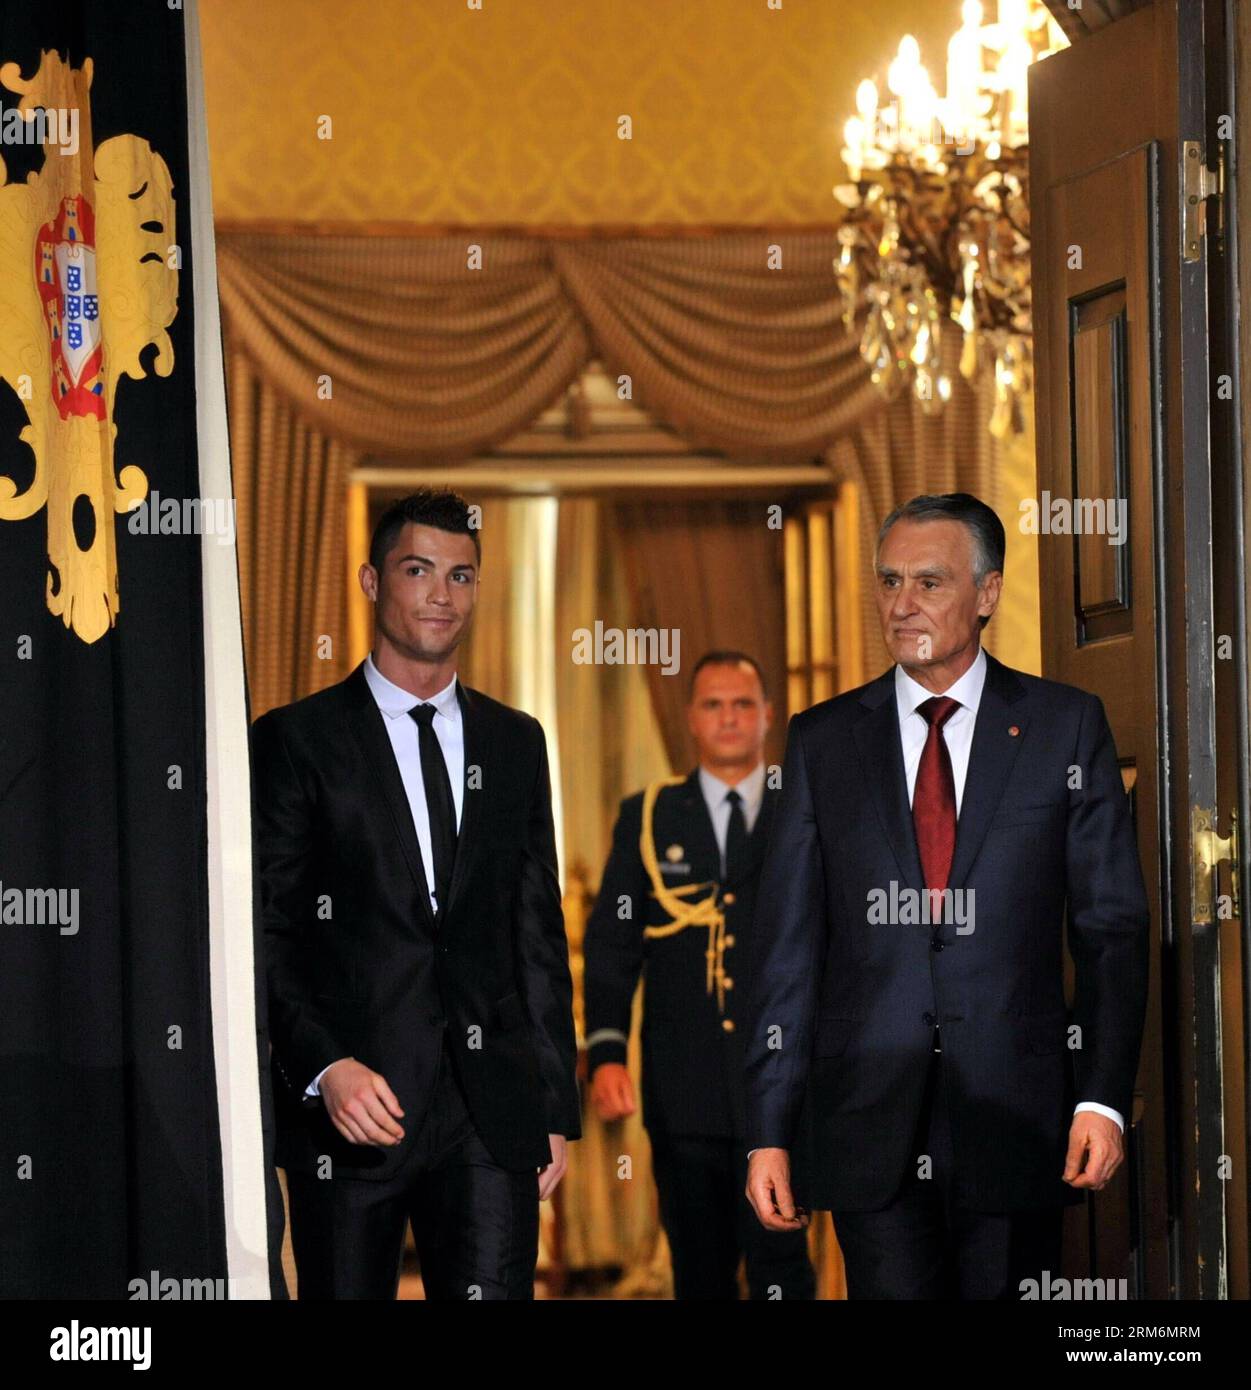 LISBON, Jan. 20, 2014 - Portuguese football super star Cristiano Ronaldo (L) walks into the awarding ceremony during which he is awarded the Grand Officer of the Order of Infante D. Henrique by Portuguese President Anibal Cavaco Silva at the Presidential Palace in Lisbon, Portugal, on Jan. 20, 2014. Ronaldo was awarded the country s top honor for his contribution to the national team and the prestige he has brought for Portugal around the world. (Xinhua/Zhang Liyun) (hy) (SP)PORTUGAL-LISBON-FOOTBALL-CRISTIANO RONALDO-TOP HONOR AWARDING PUBLICATIONxNOTxINxCHN   Lisbon Jan 20 2014 PORTUGUESE Foo Stock Photo